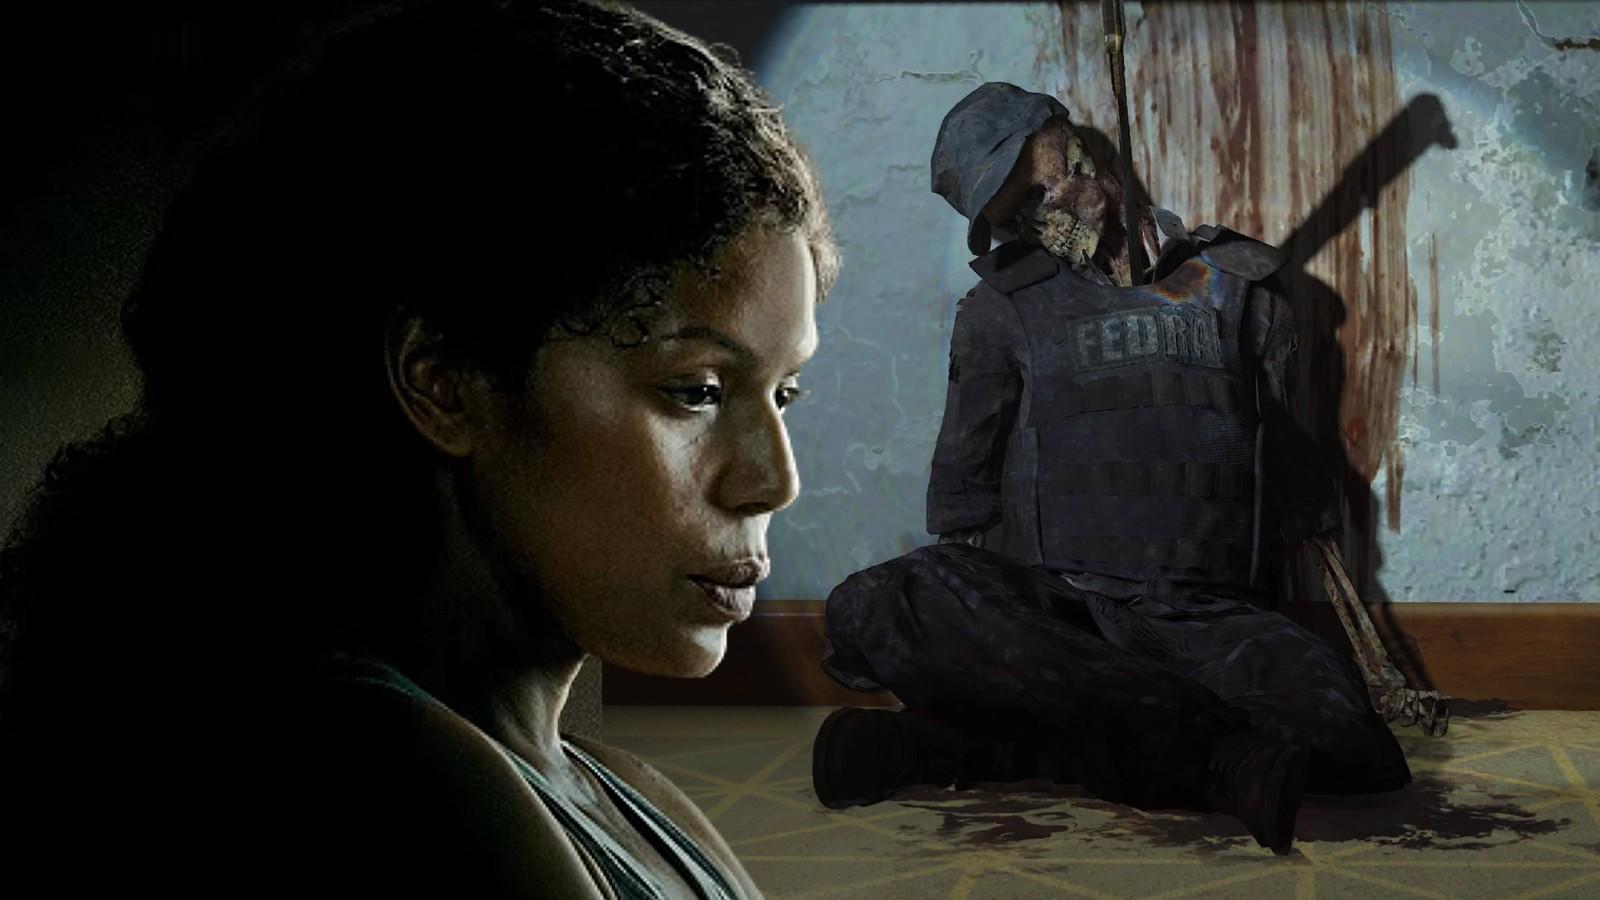 Fireflies leader Marlene in The Last of Us HBO show, and a dead FEDRA soldier